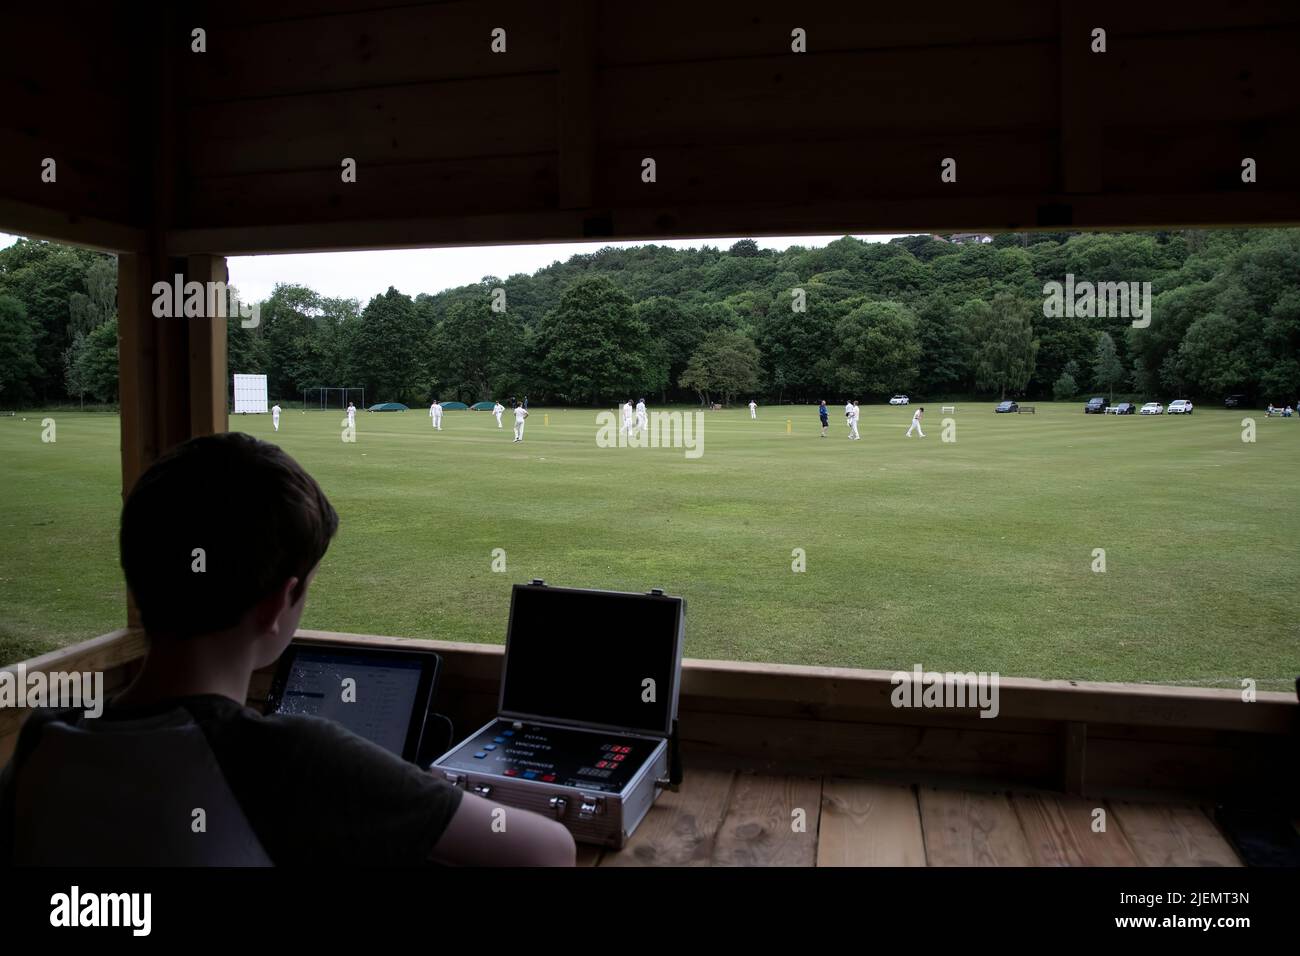 View from the scorers box as the scorer electronically records the progress and of a village cricket match at a league game of cricket in Yorkshire Stock Photo